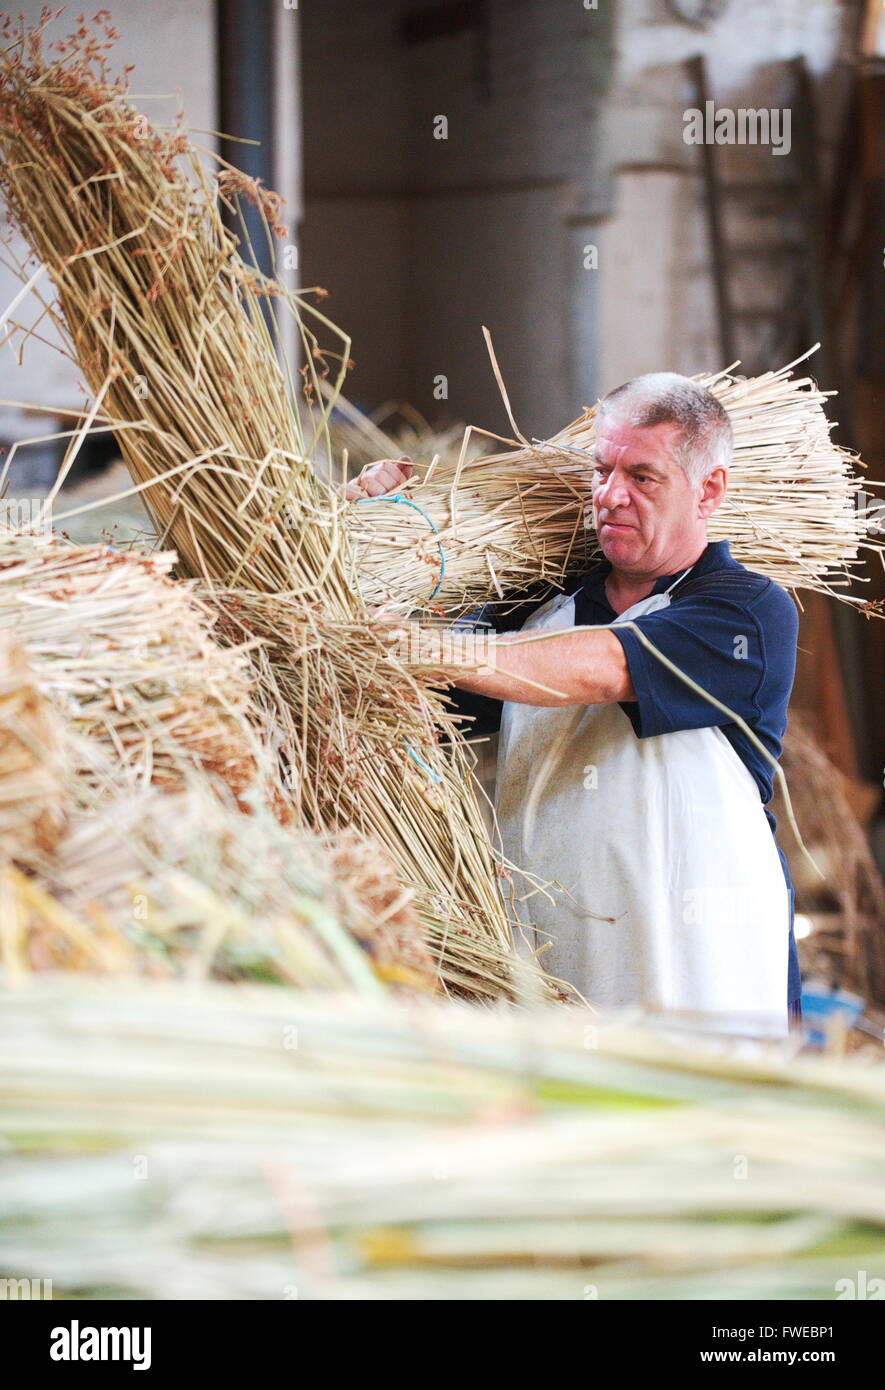 Male worker in the English industry of rush weaving stacks freshly cut and dried bulrushes in factory ready for weaving Stock Photo